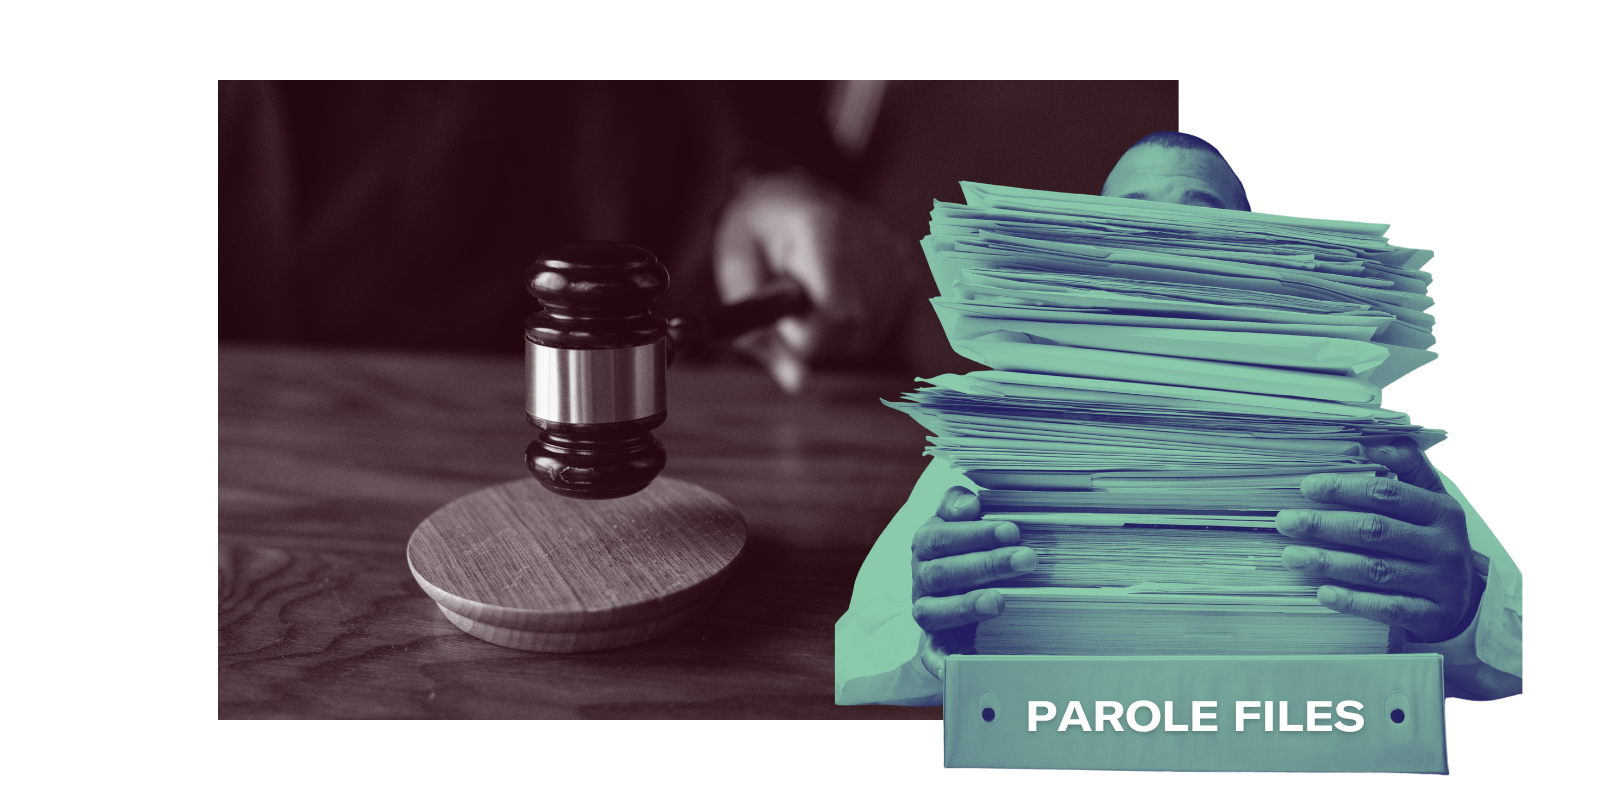 graphic with stacks of files and a gavel in the background to symbolize parole transparency